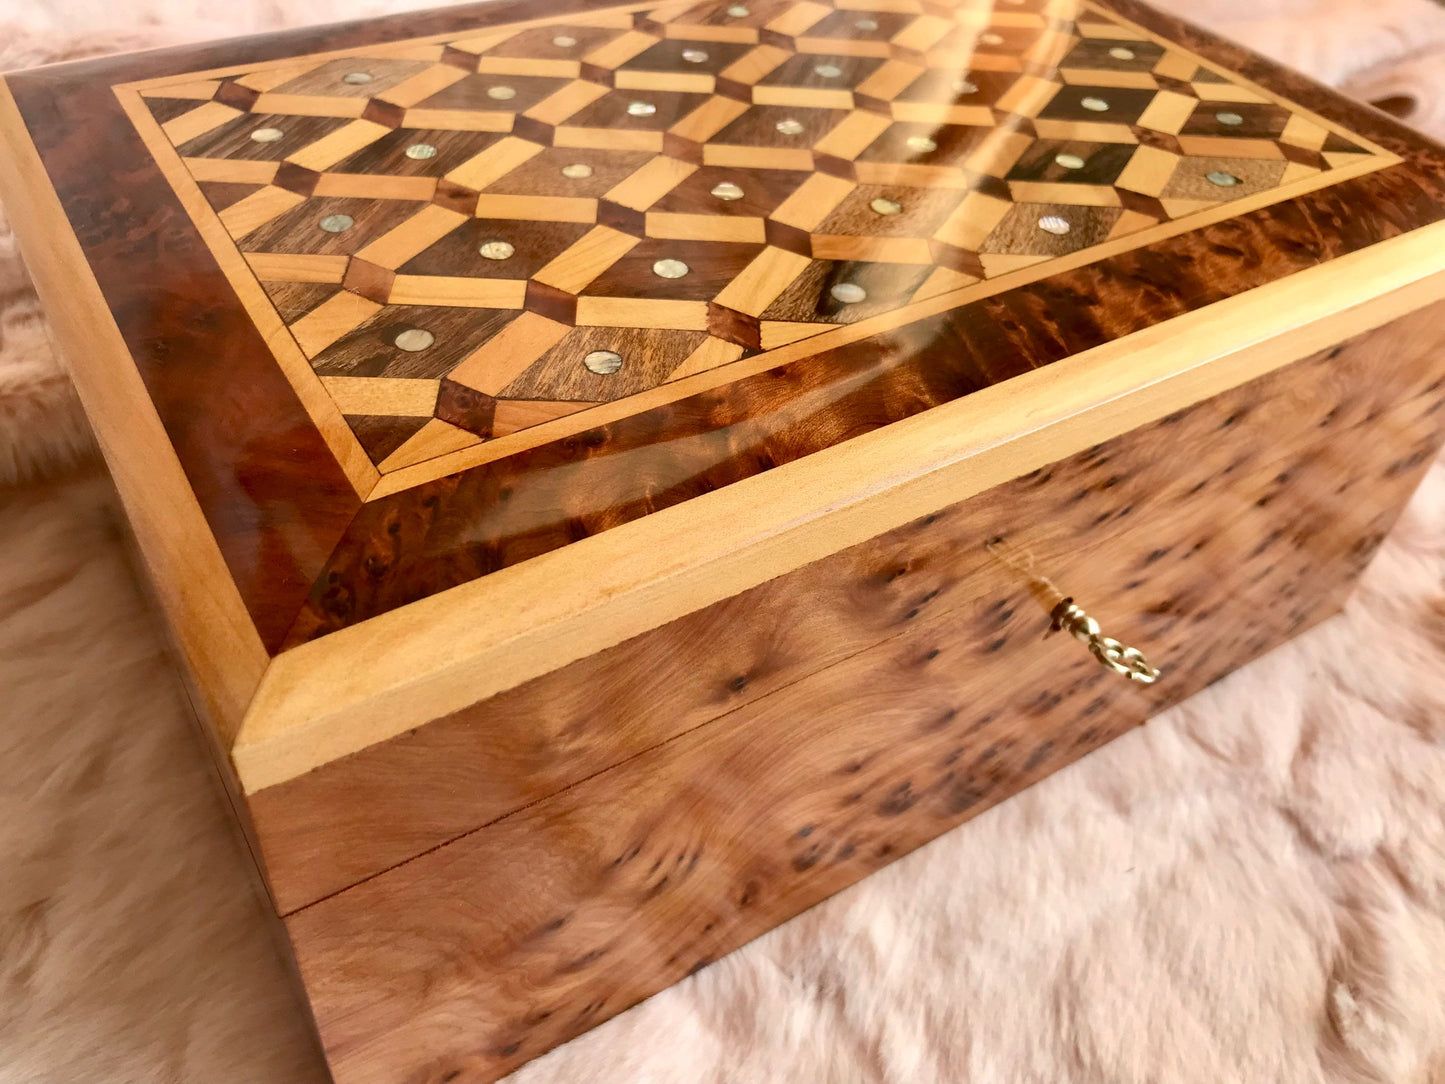 10"x7" Large jewellery Thuya wood Box with key,inlaid with mother of pearl,cedar wood,Gift idea, engraved Custom Moroccan wood Box with lock